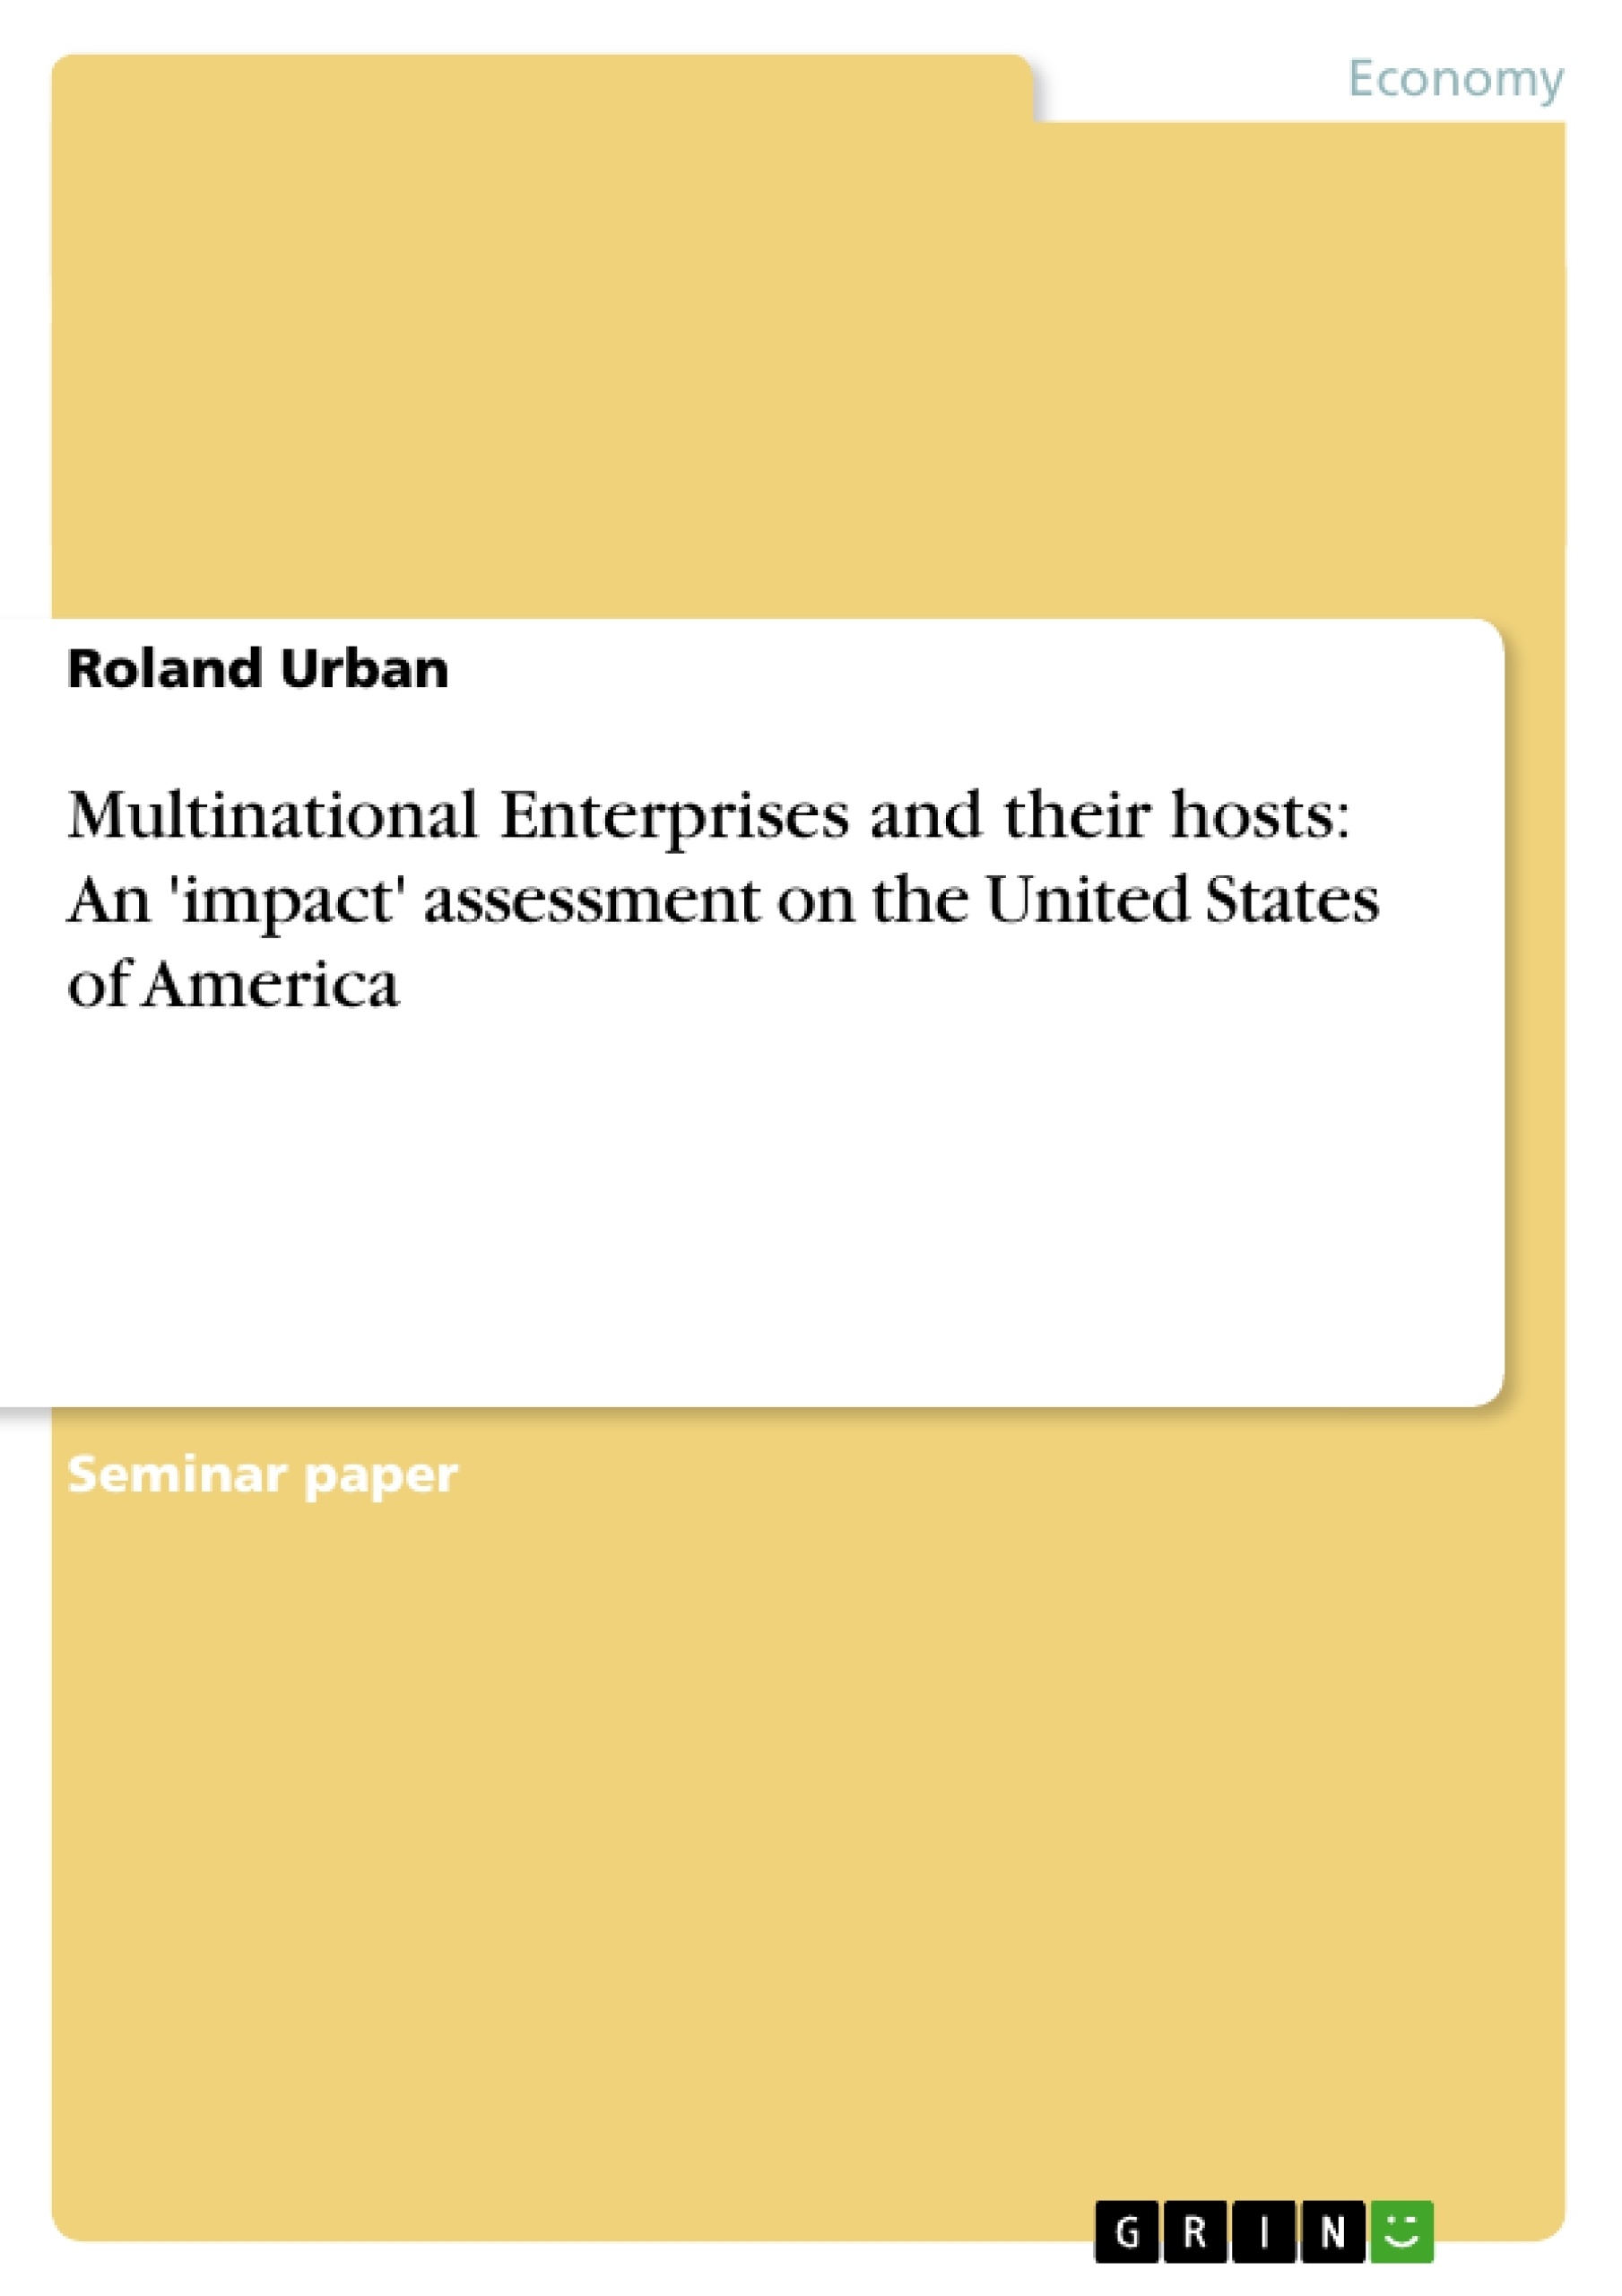 Title: Multinational Enterprises and their hosts: An 'impact' assessment on the United States of America